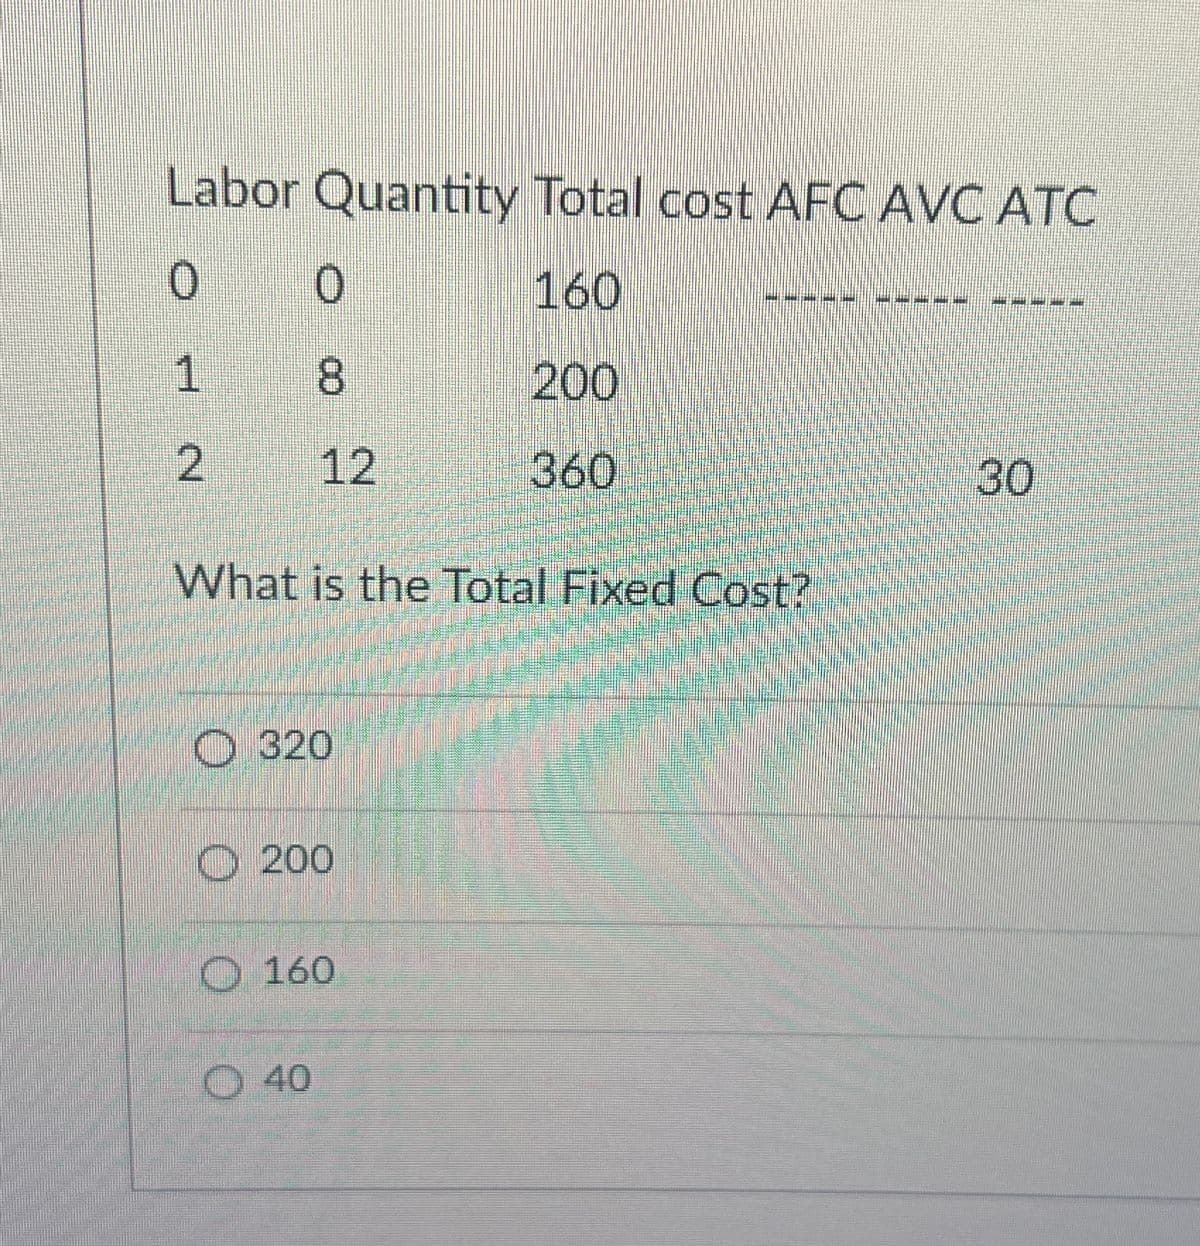 Labor Quantity Total cost AFC AVC ATC
0
0
160
خر
8
200
2
12
360
What is the Total Fixed Cost?
O 320
200
160
O 40
30